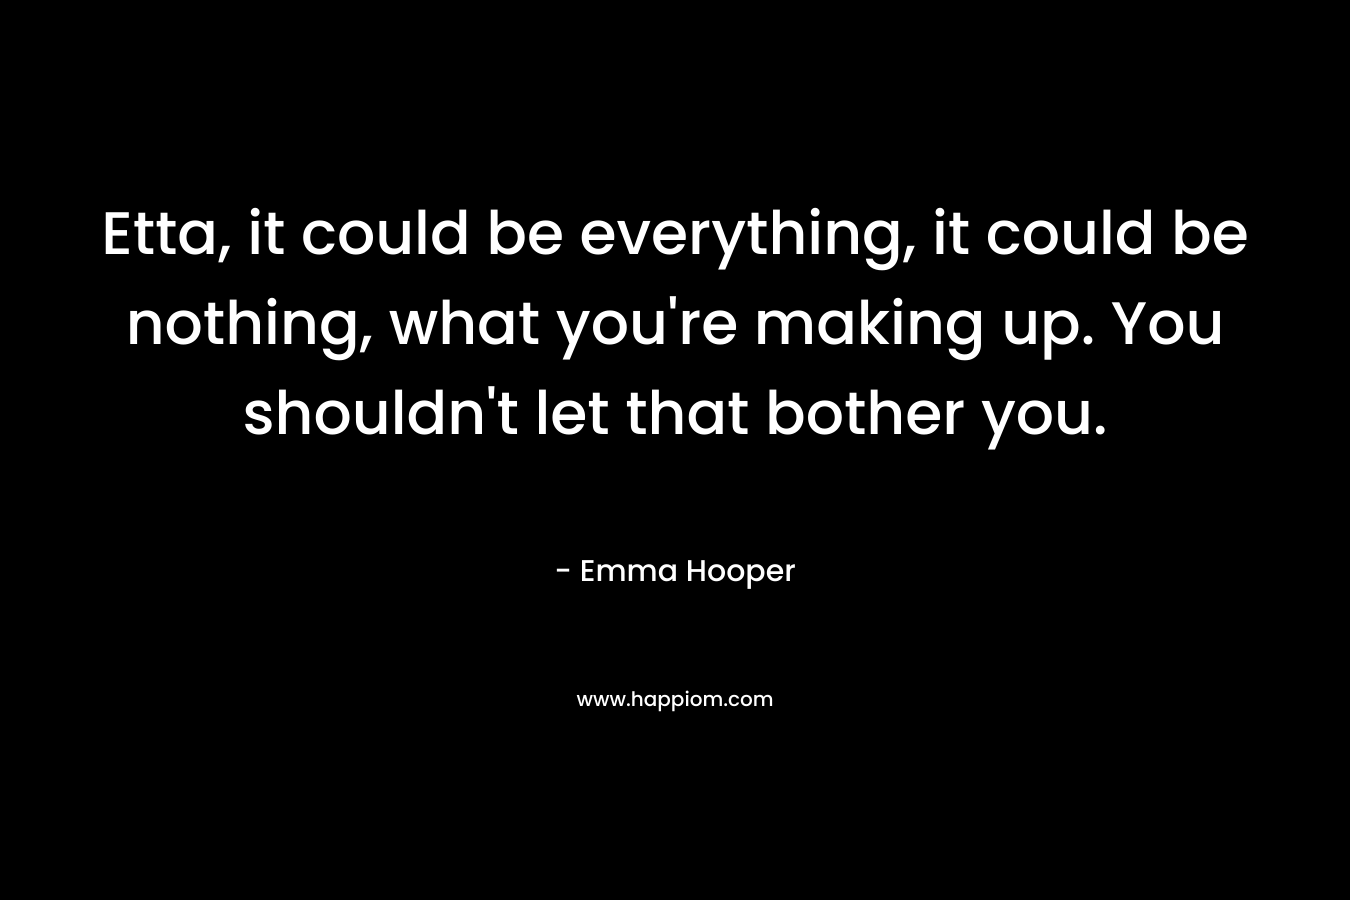 Etta, it could be everything, it could be nothing, what you’re making up. You shouldn’t let that bother you. – Emma Hooper